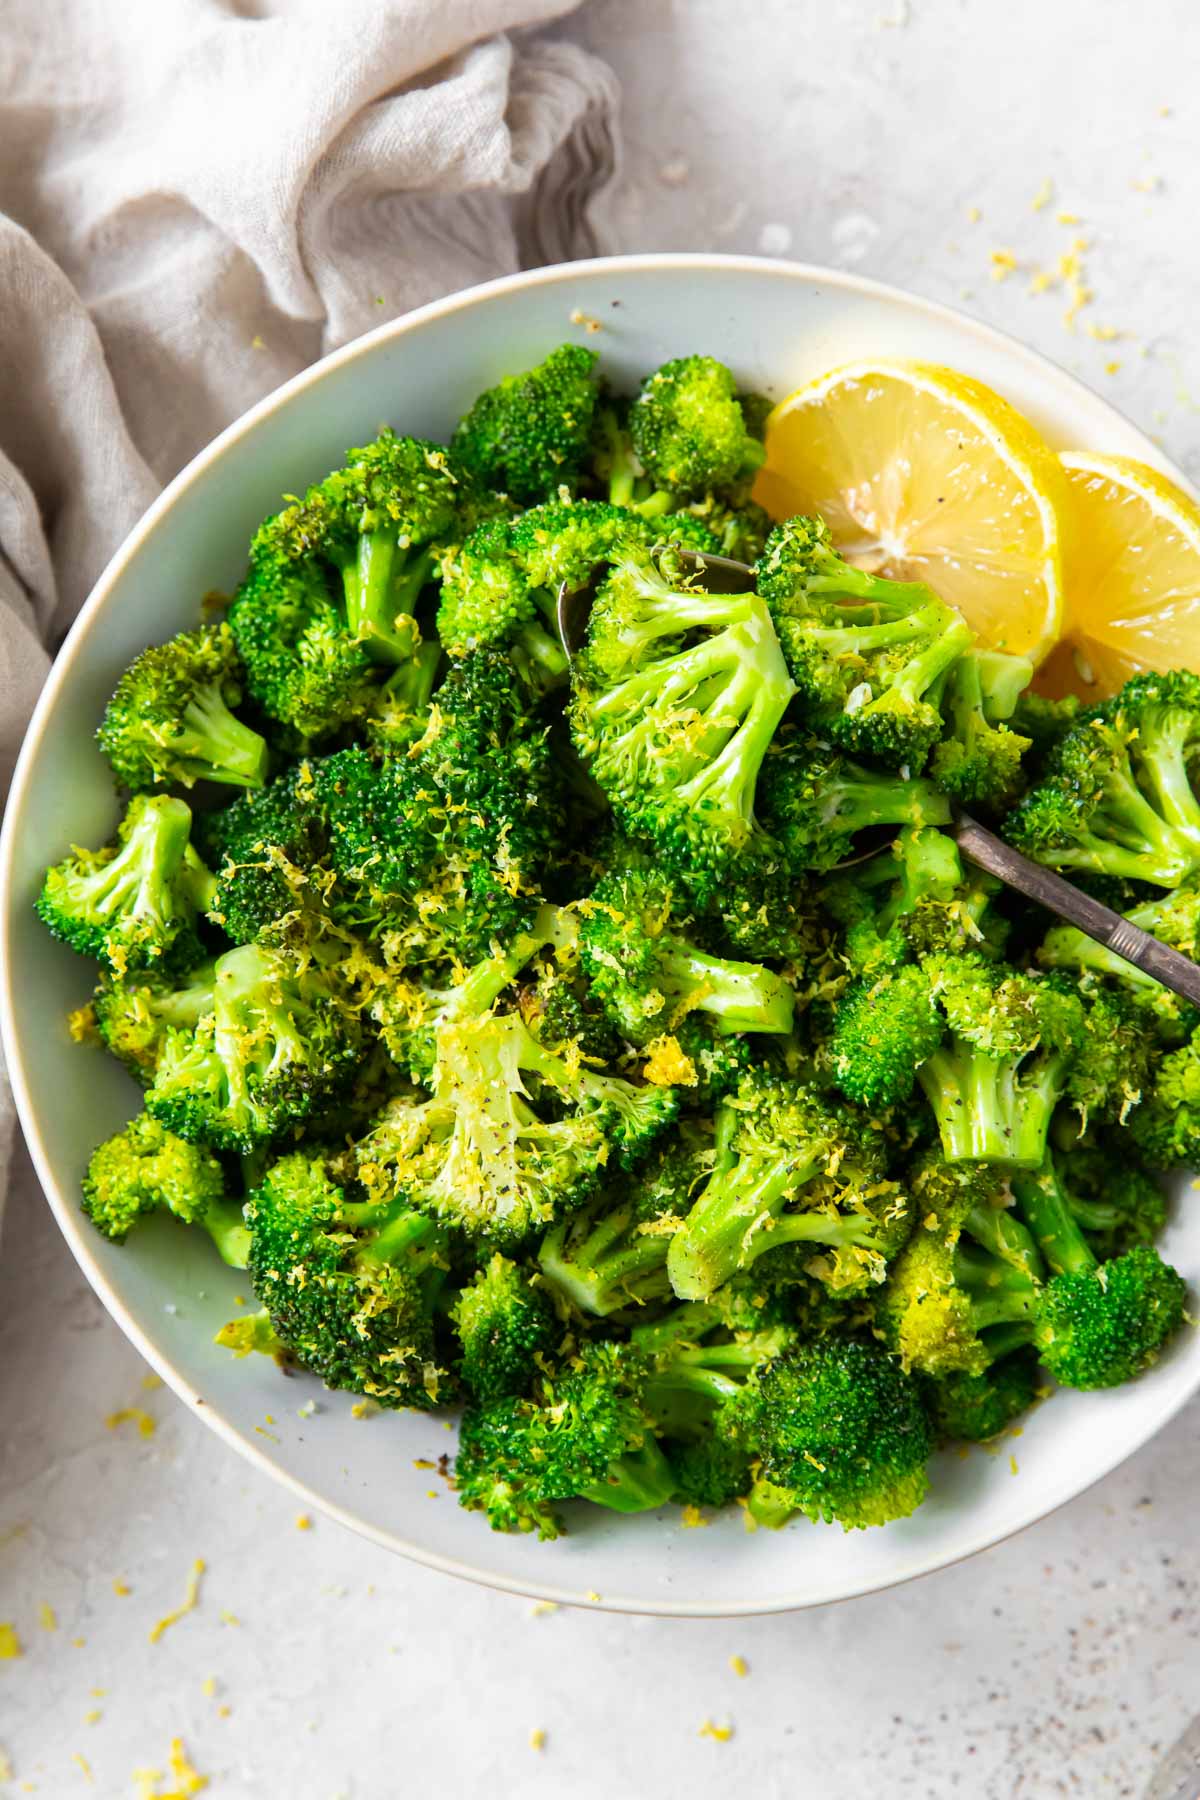 Sauteed broccoli in a serving bowl with lemon wedges.